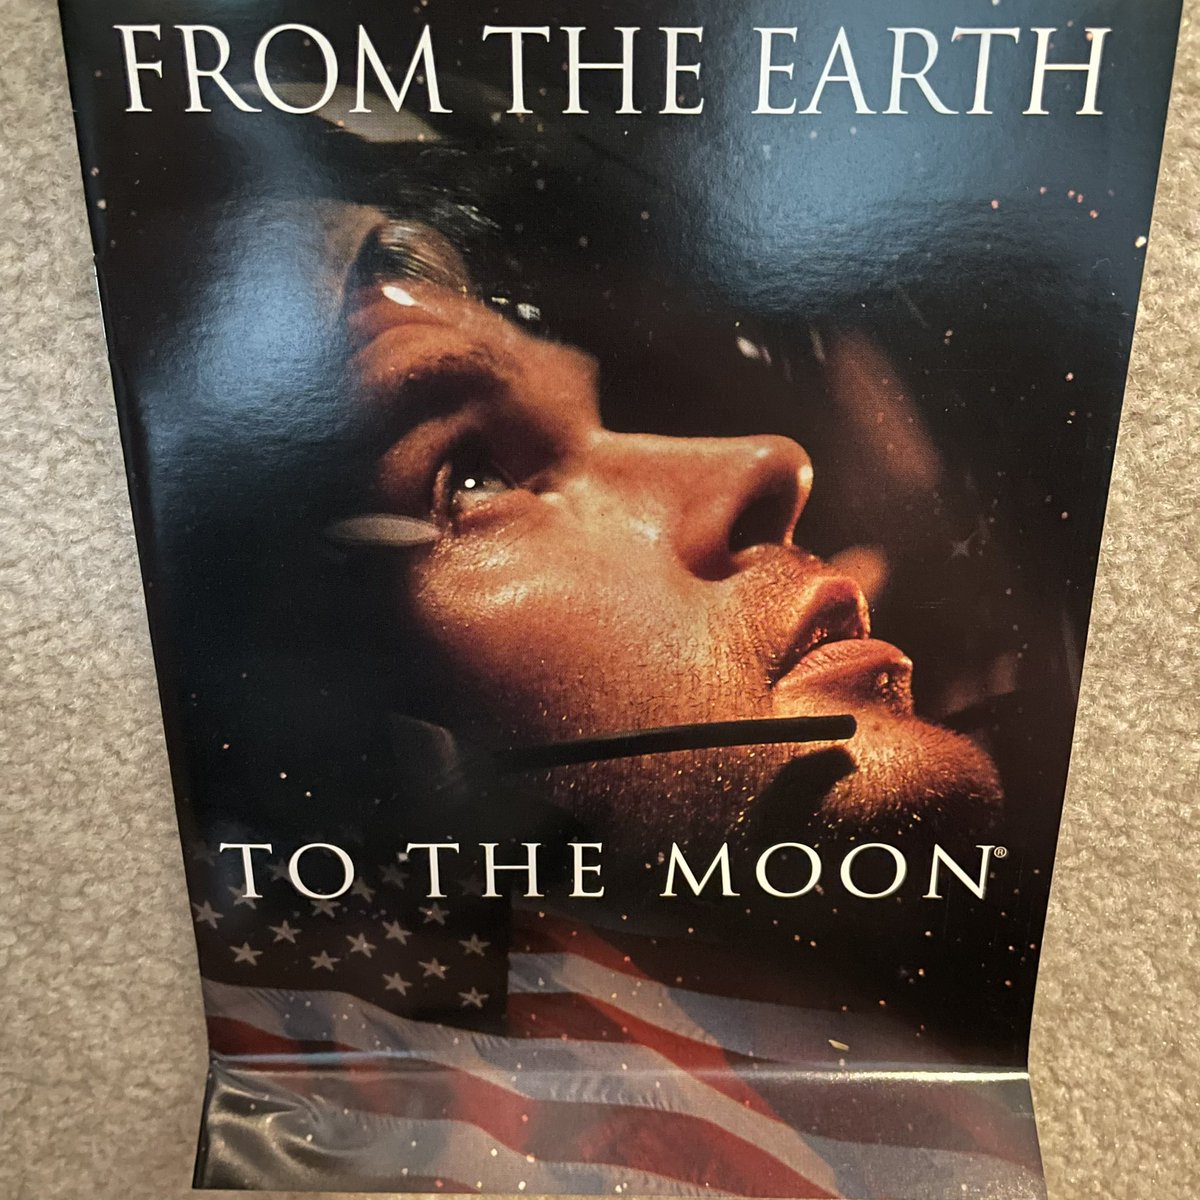 “The conquest of space is worth the risk of life”
#fromtheearthtothemoon #90stv #miniseries #tomhanks #nicksearcy #lanesmith #stephenroot #danielhughkelly #timdaly #caryelwes #brettcullen #ritawilson #holmesosborne #chrisisaak #samanderson #bryancranston #clinthoward #dylanbaker